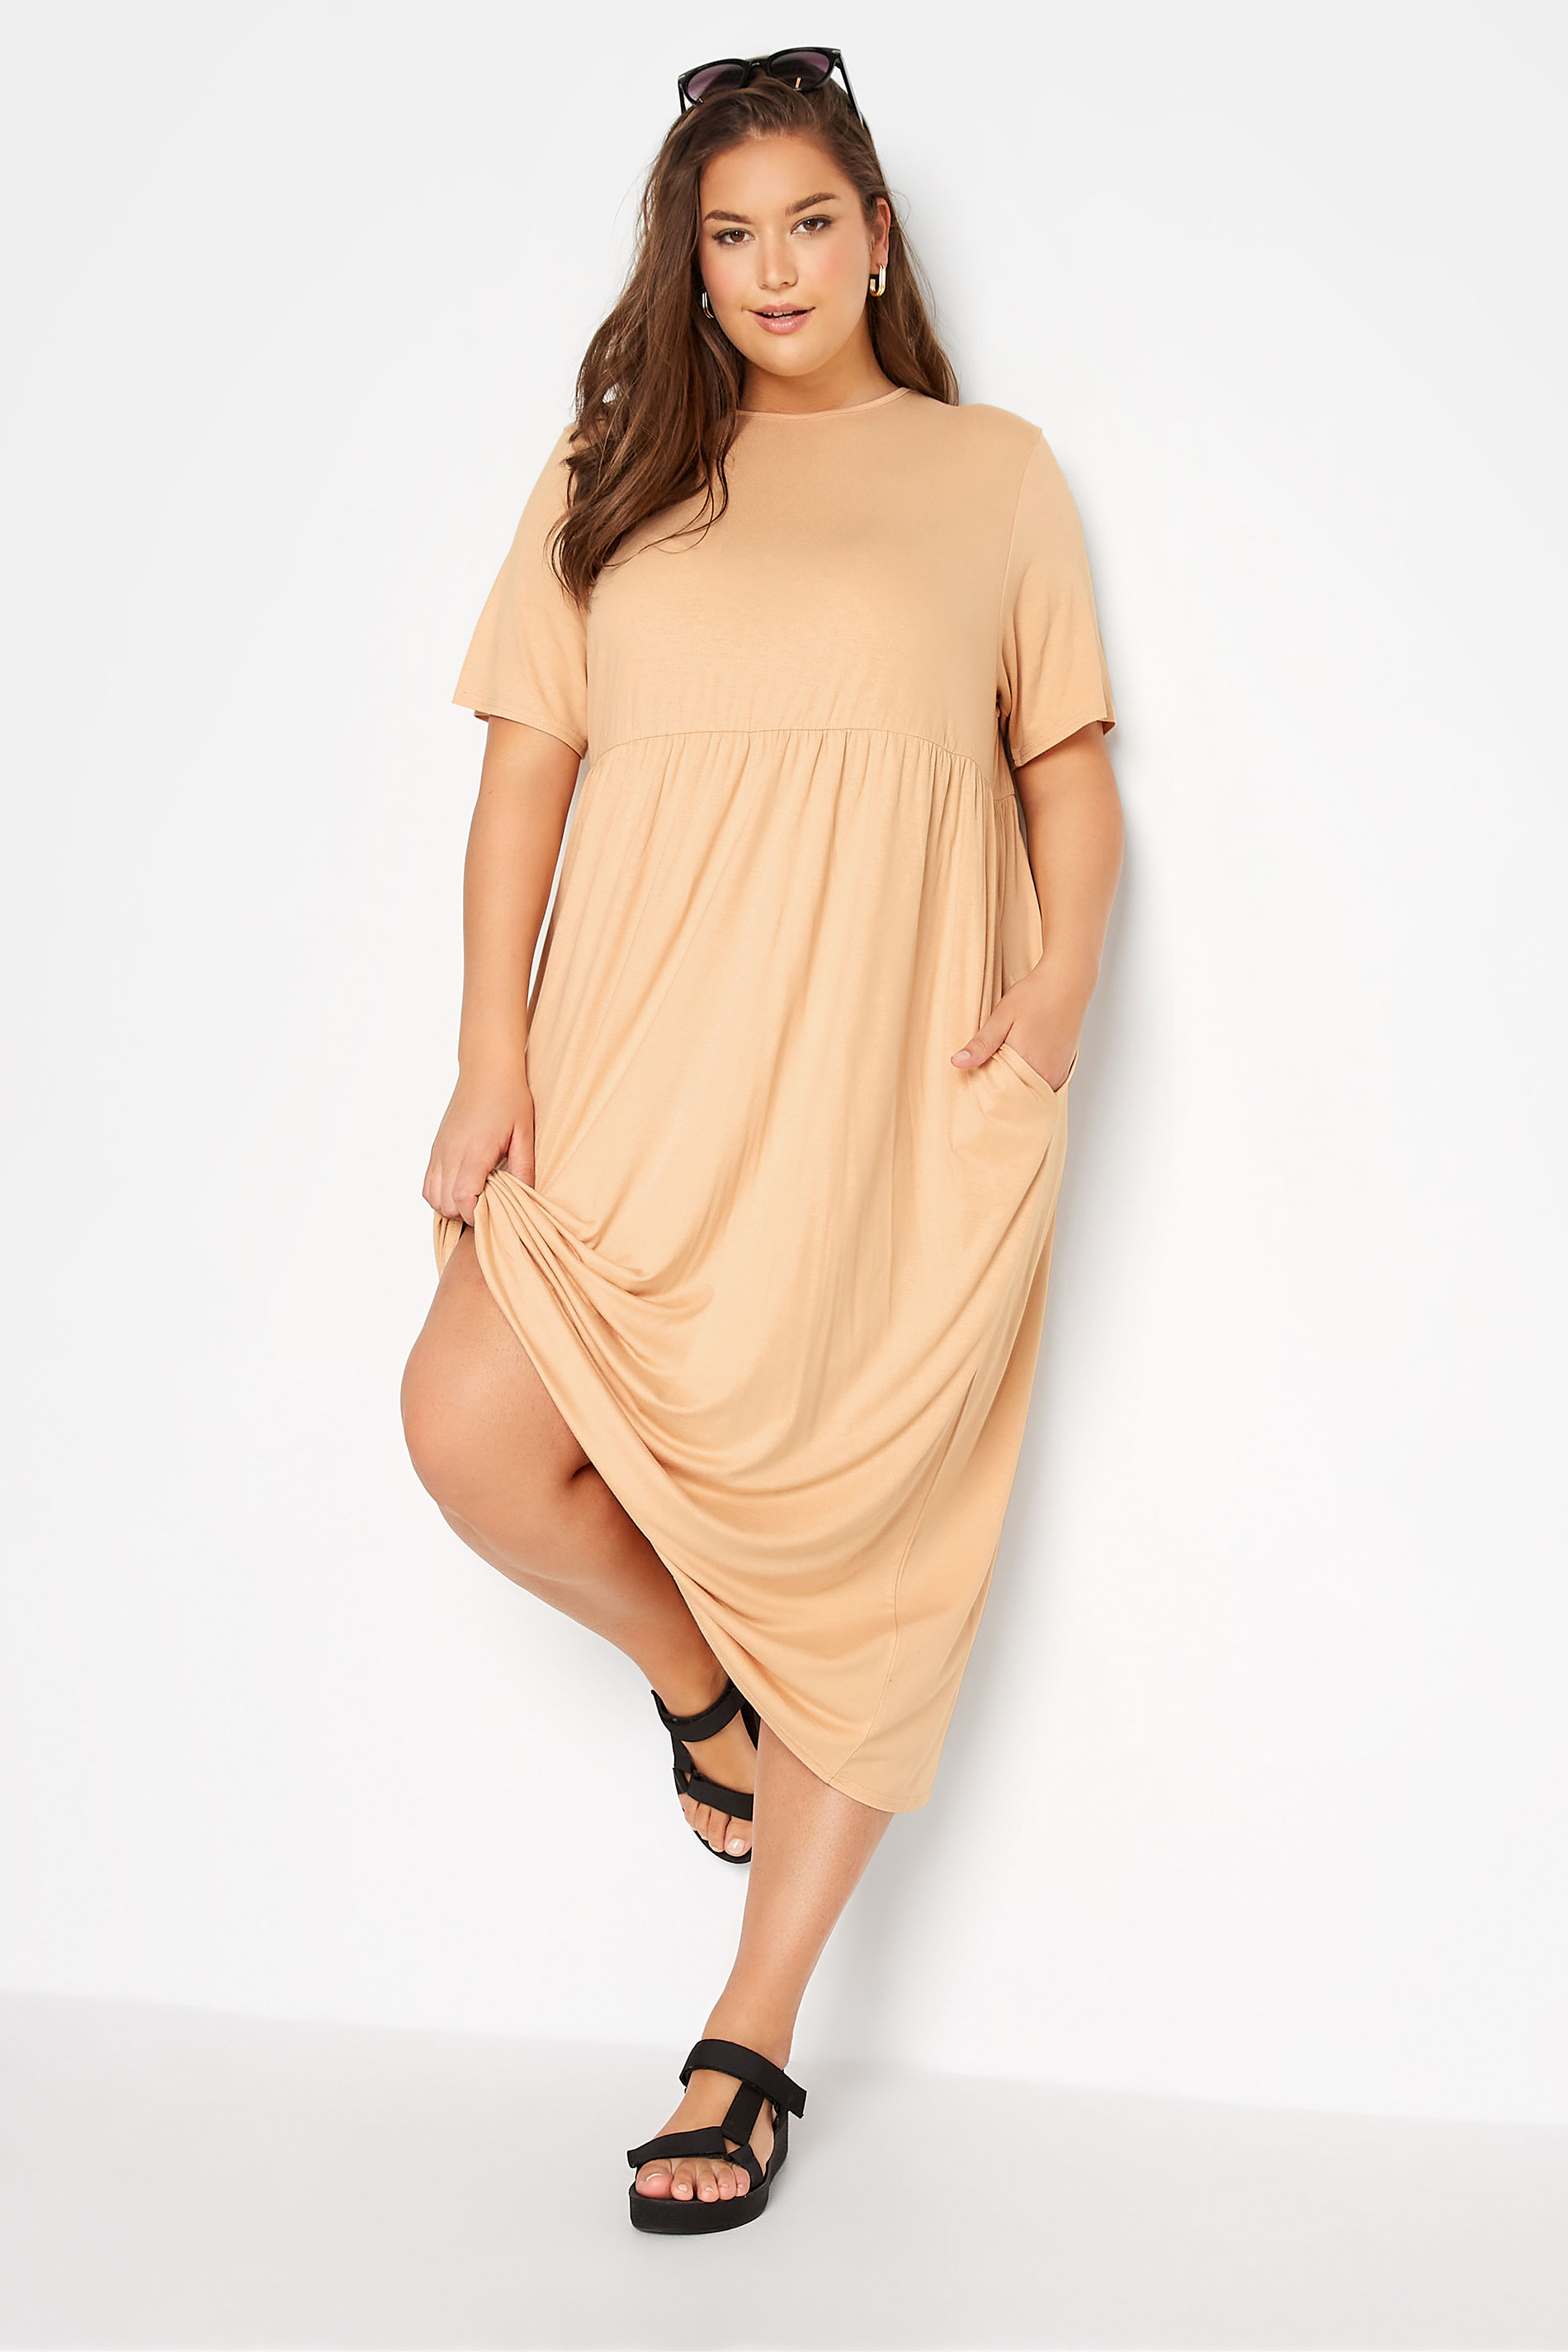 Robes Grande Taille Grande taille  Robes Longues | LIMITED COLLECTION - Robe Longue Beige Manches Courtes - FU81734